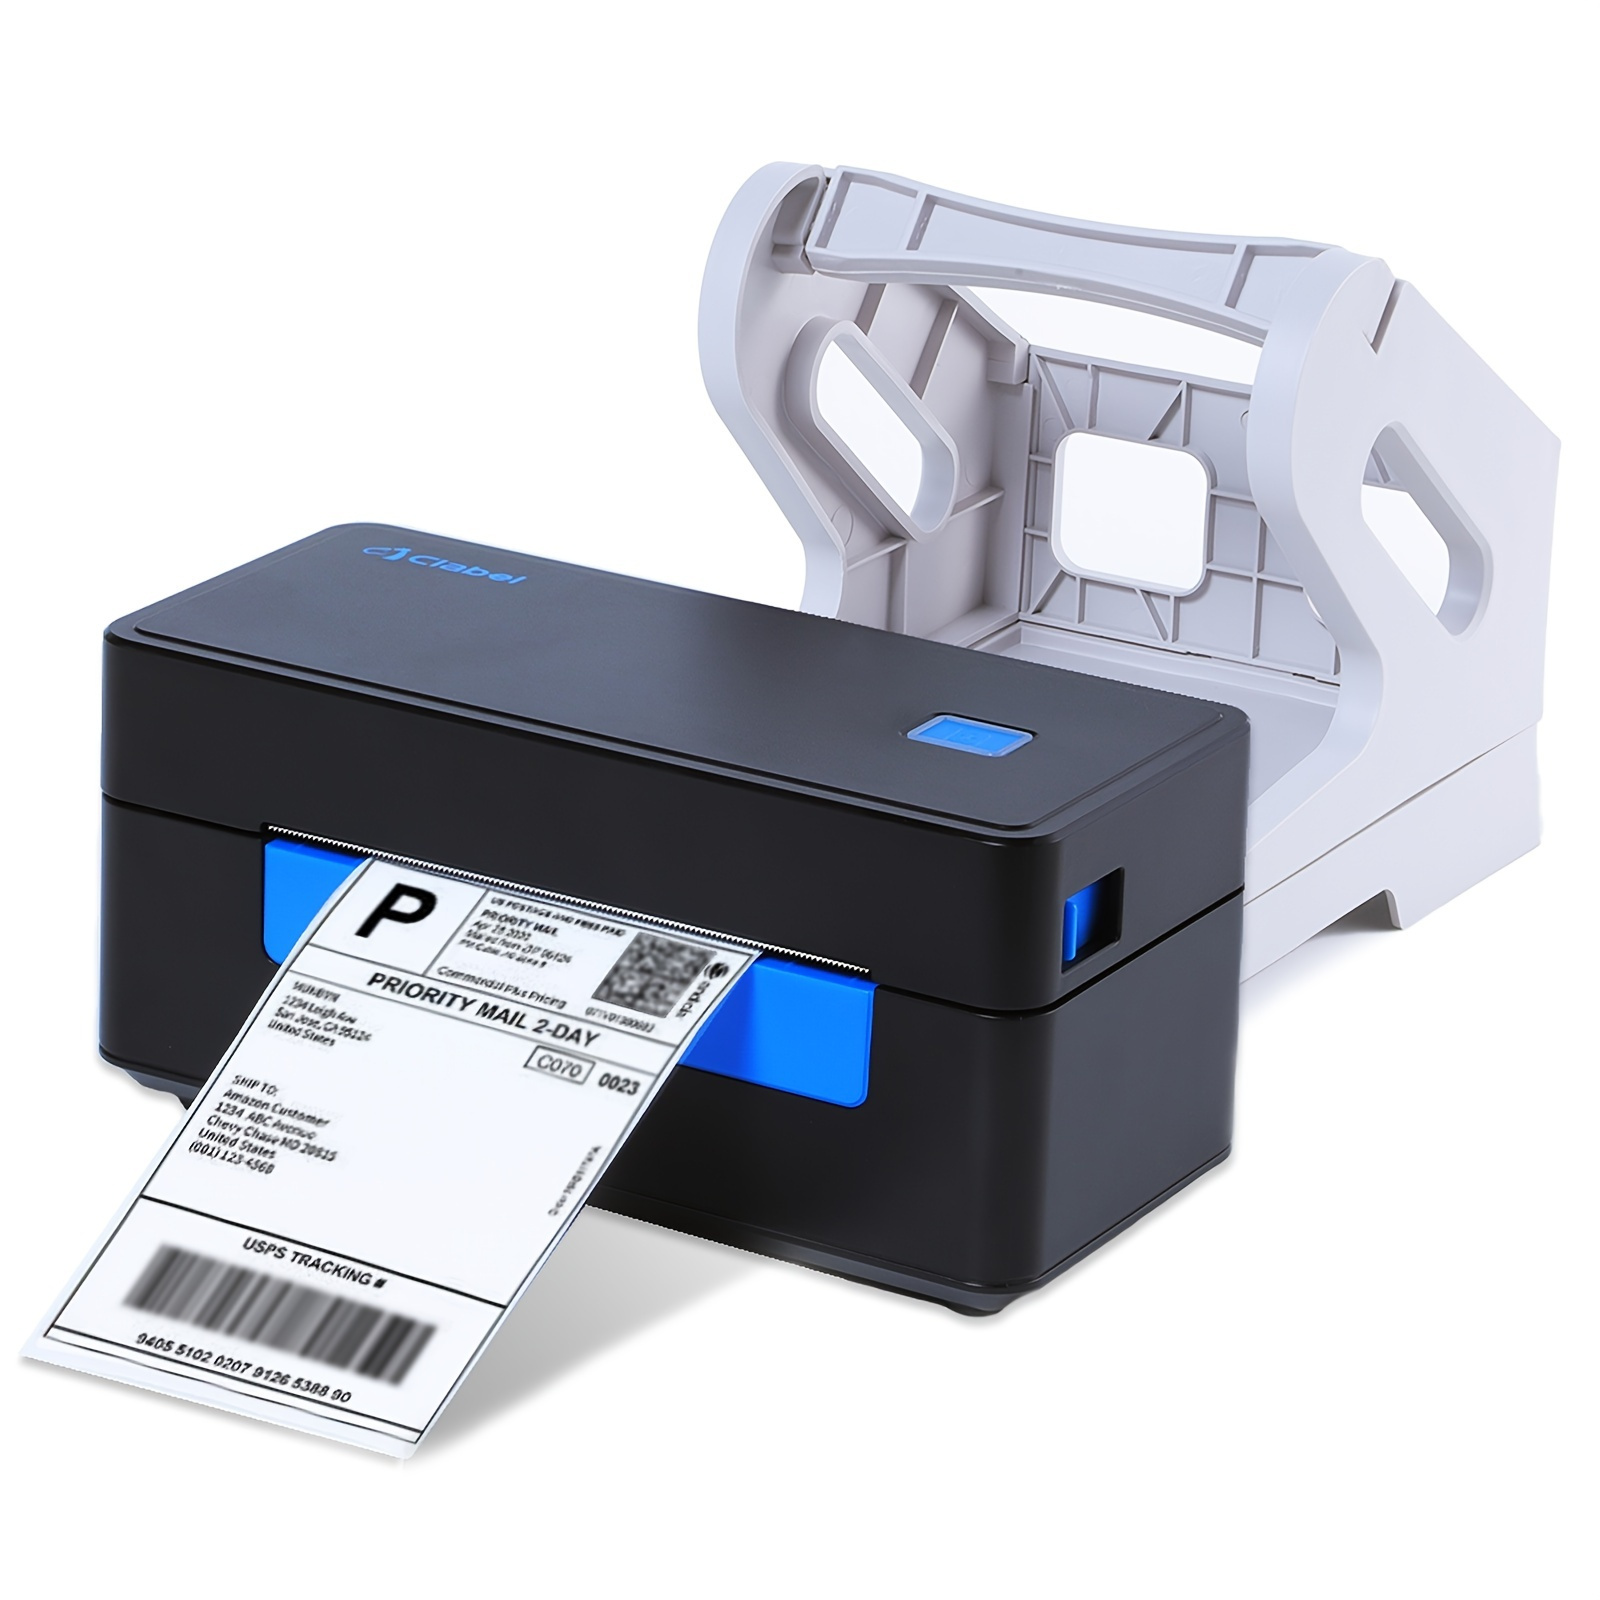 Thermal Label Printer Ct428s 4x6 Shipping Label Printer For Small